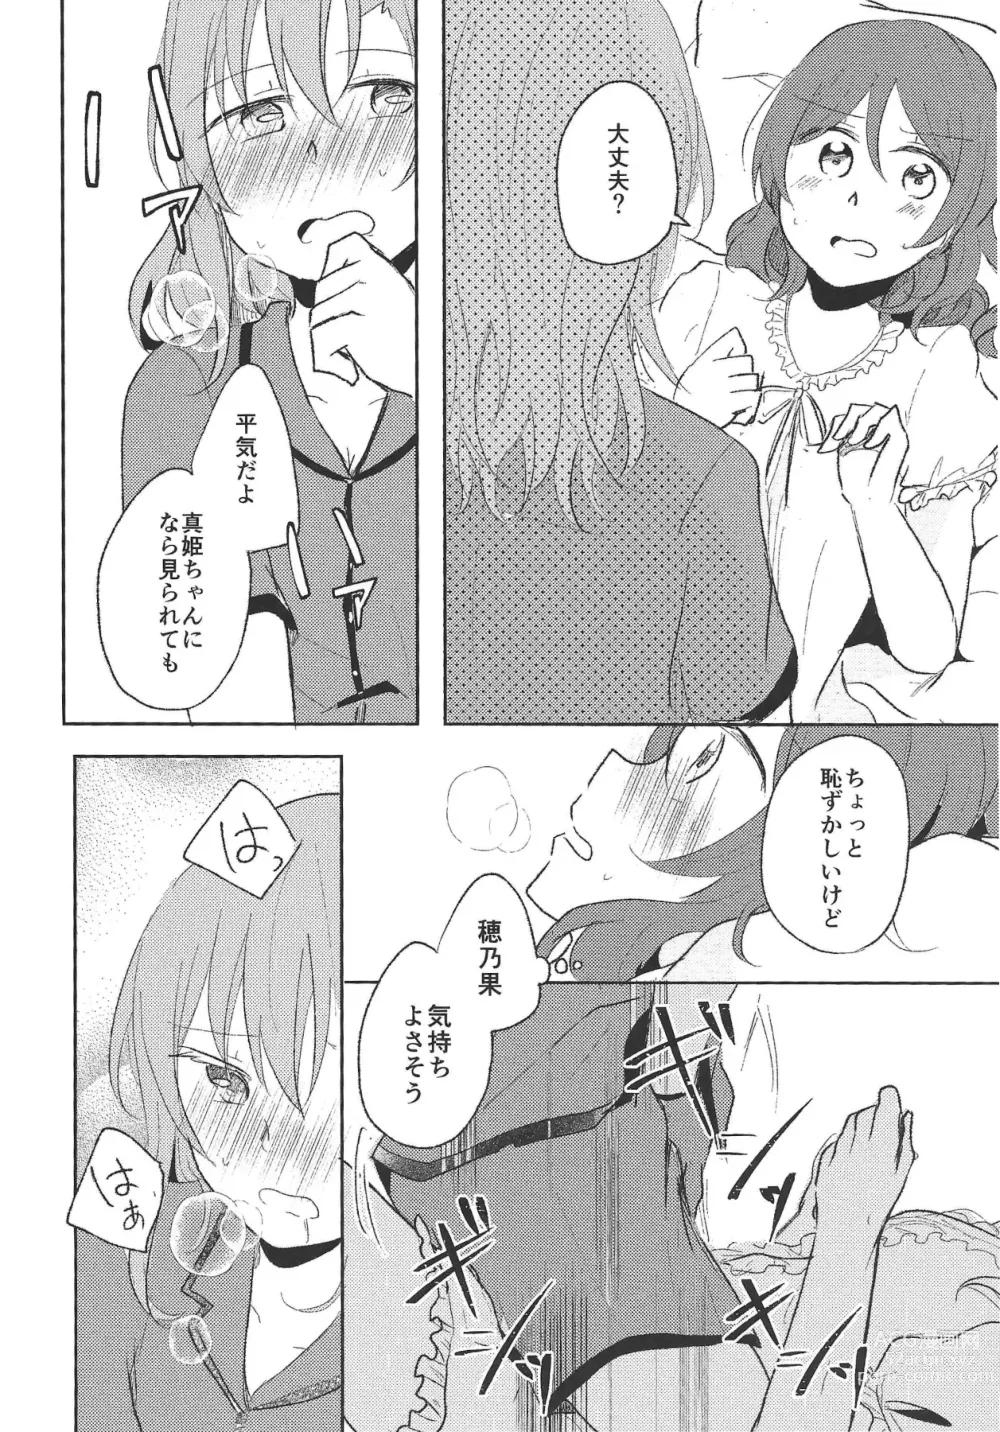 Page 11 of doujinshi LOVE STEP